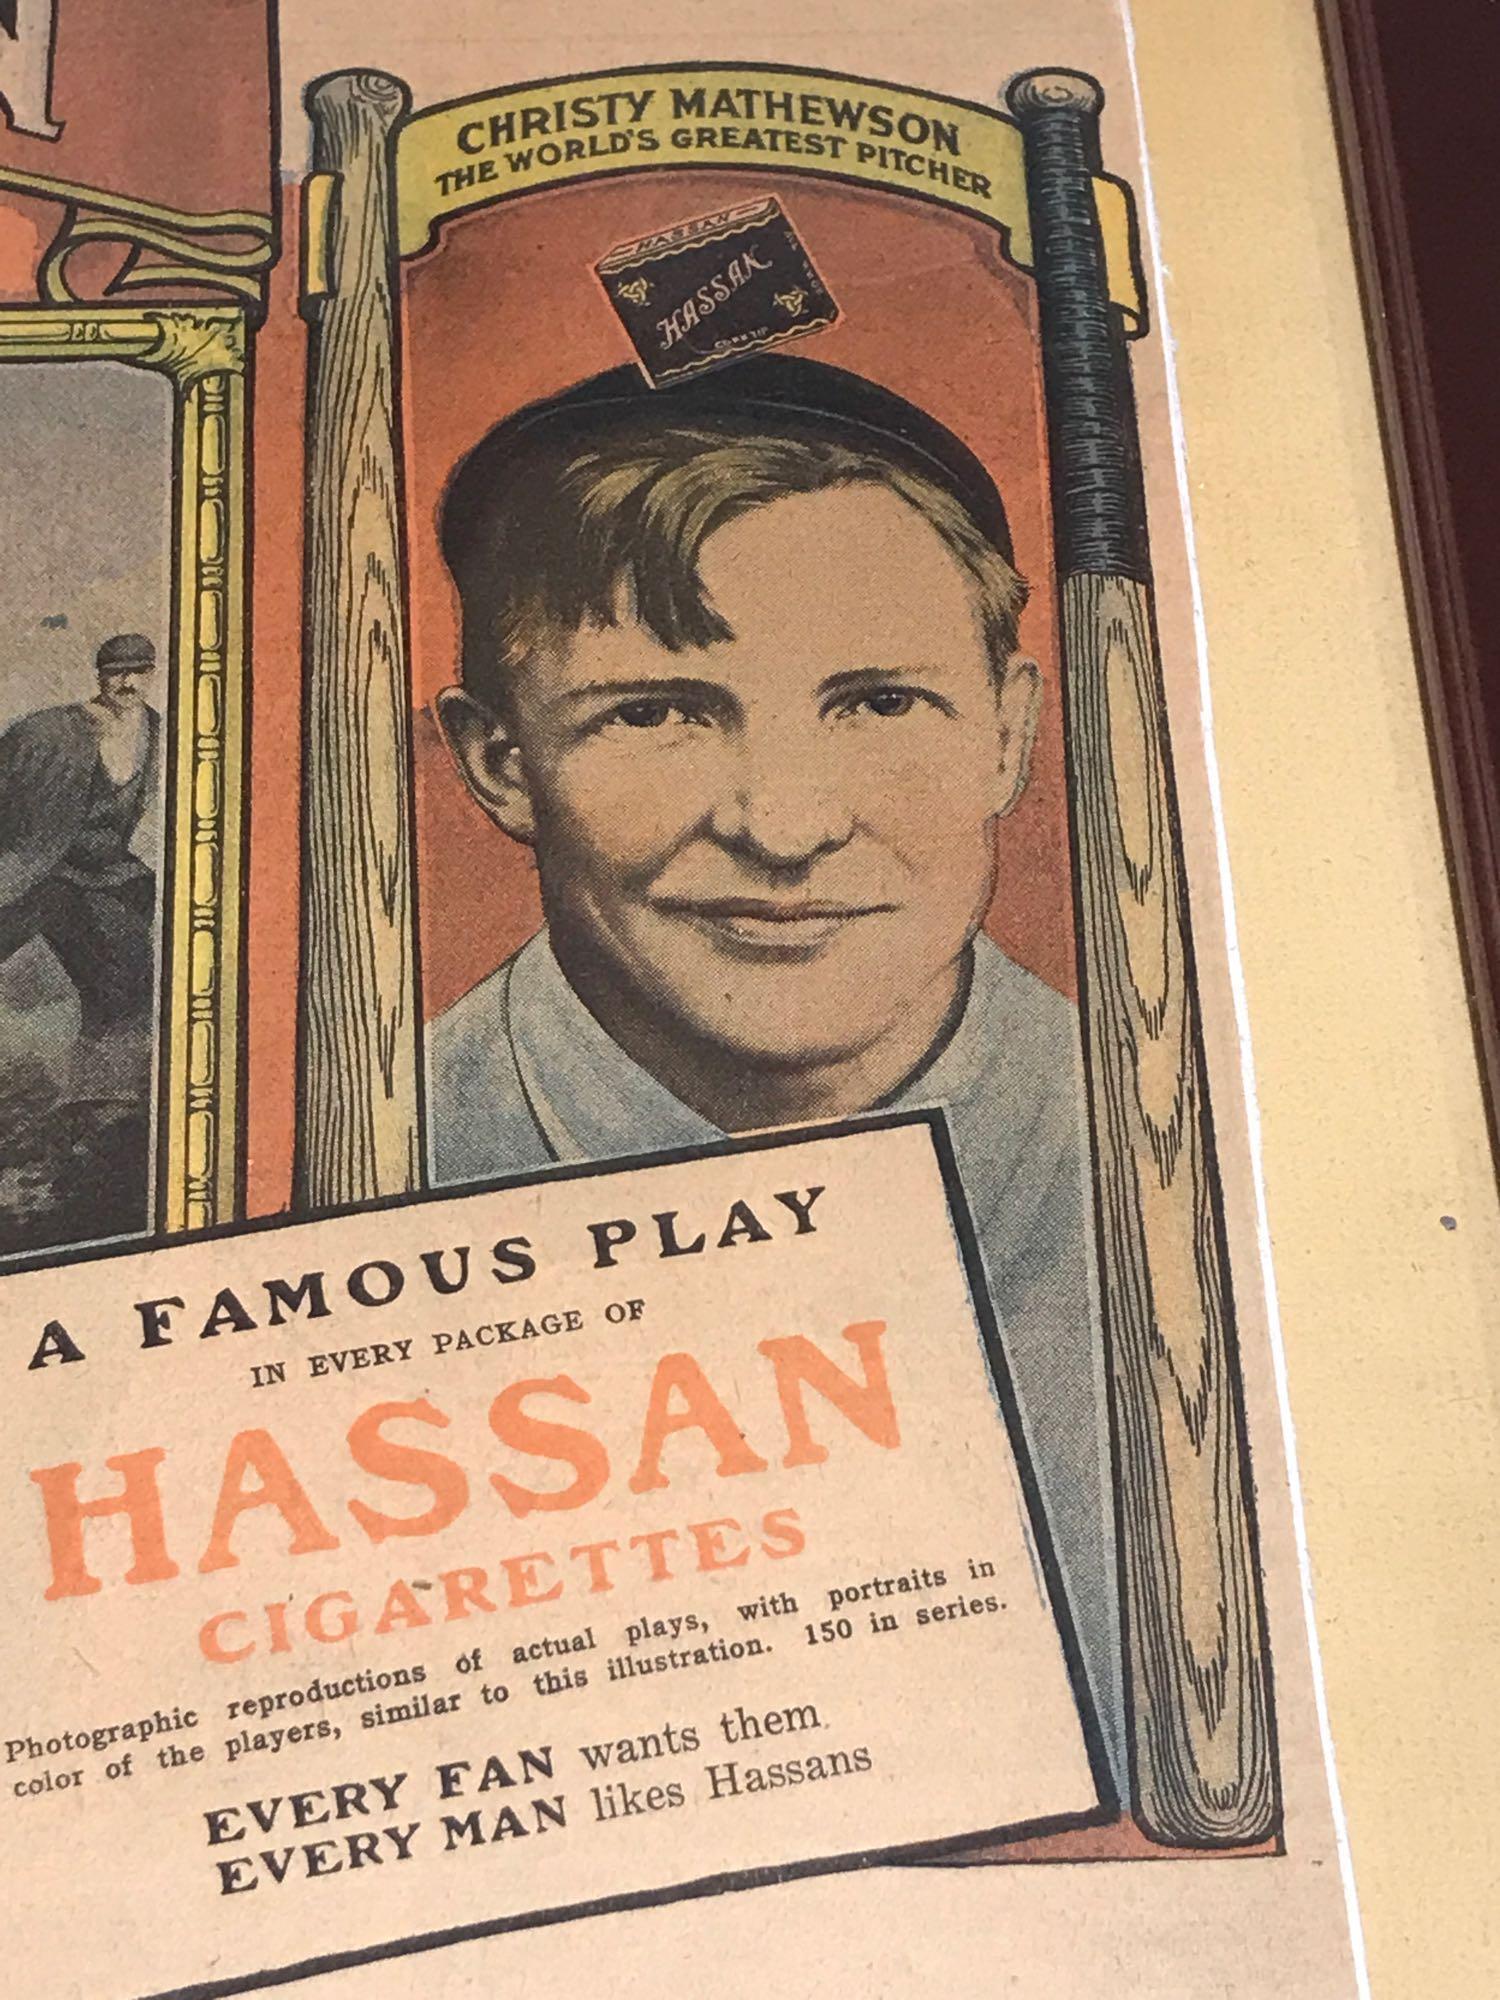 1912 Newspaper Hassan Cigarettes Ty Cobb Framed